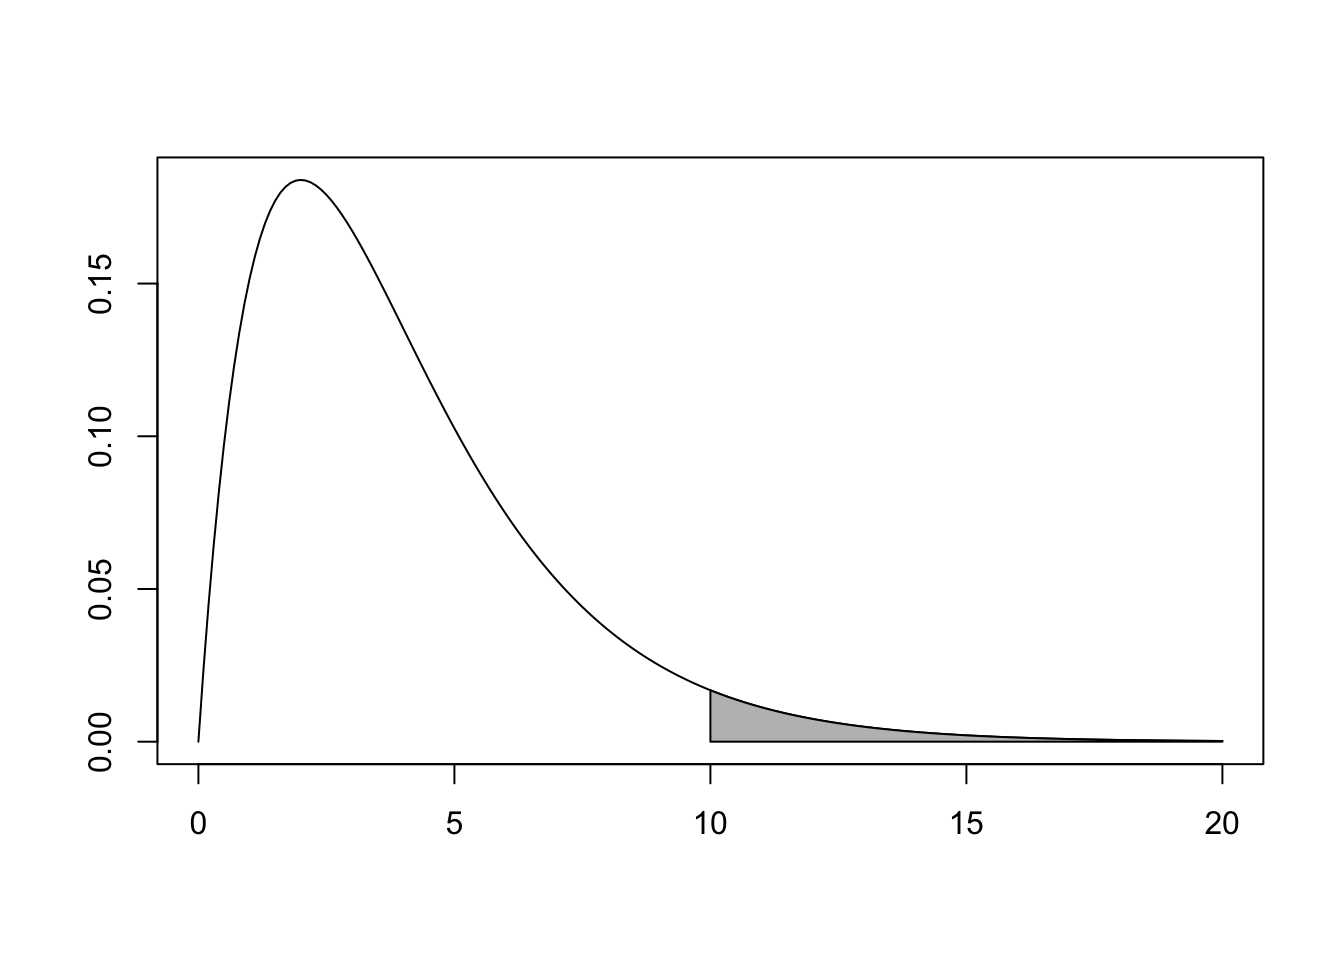 $\chi^2$ distribution with $p$-value shaded.